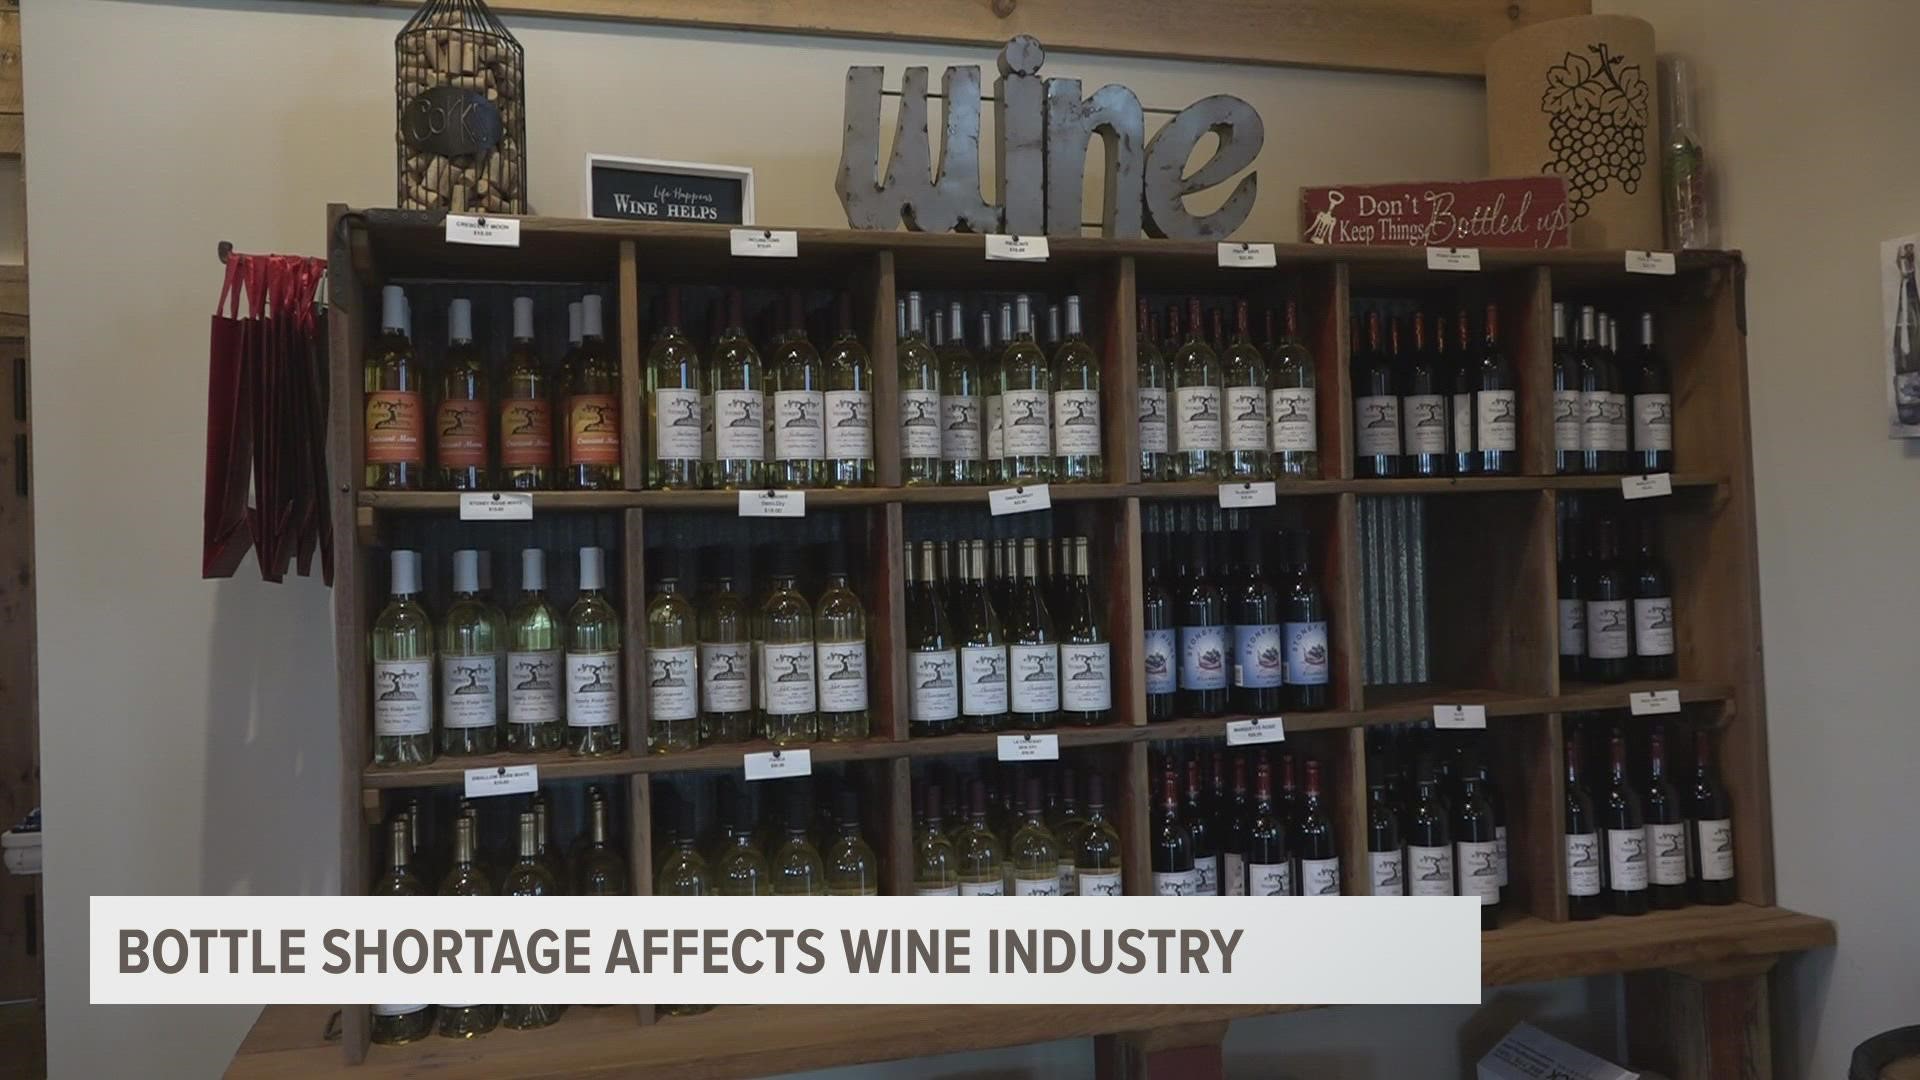 The cost of wine may increase as the price of glass bottles is up about 20% in the U.S., and the supply of bottles made overseas is harder to come by.